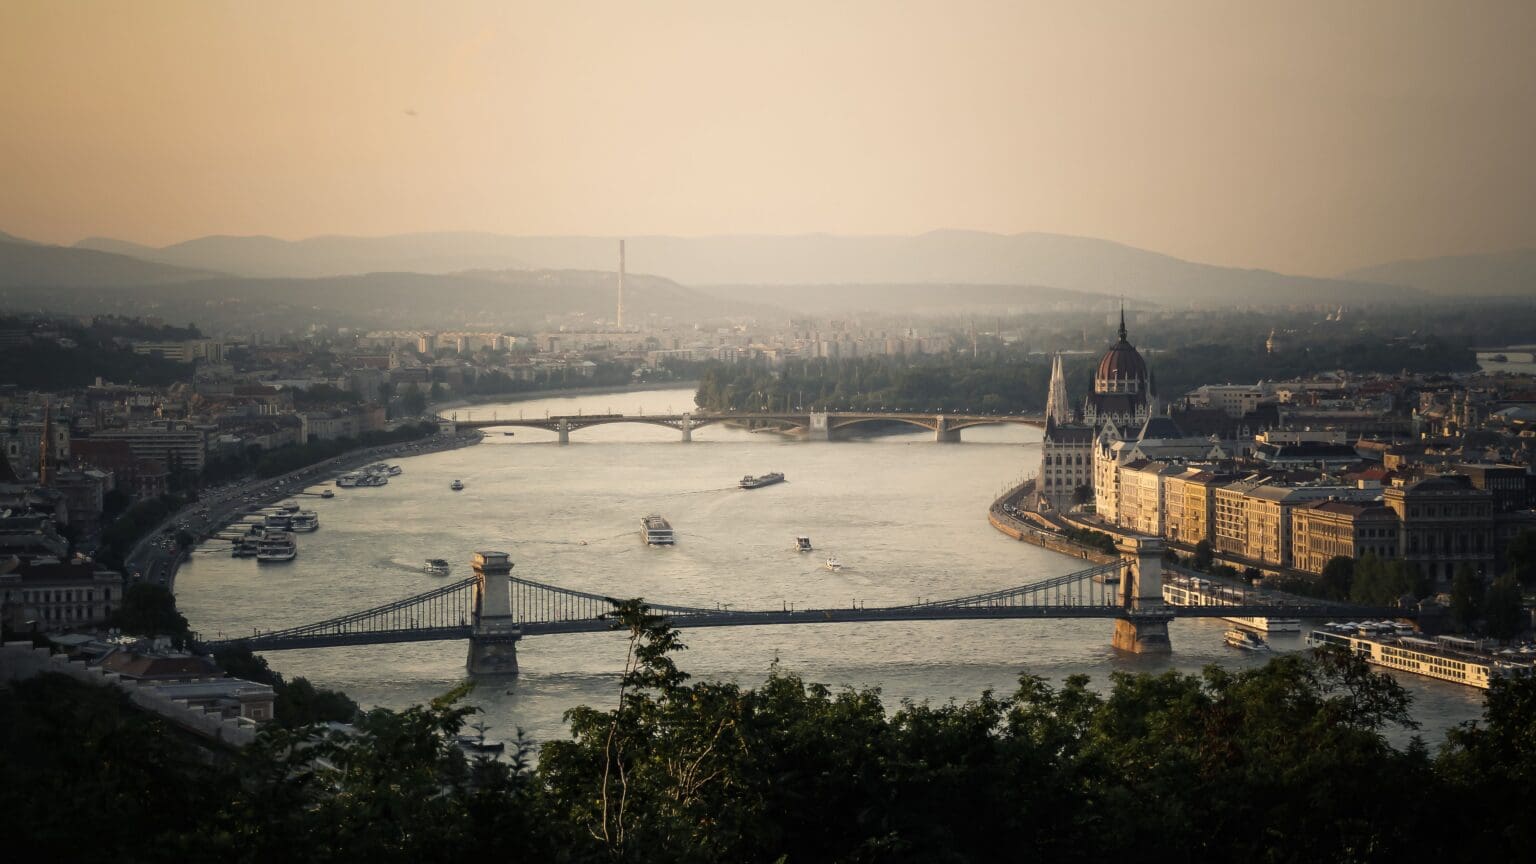 Revisiting Hungary — With Openness and Curiosity